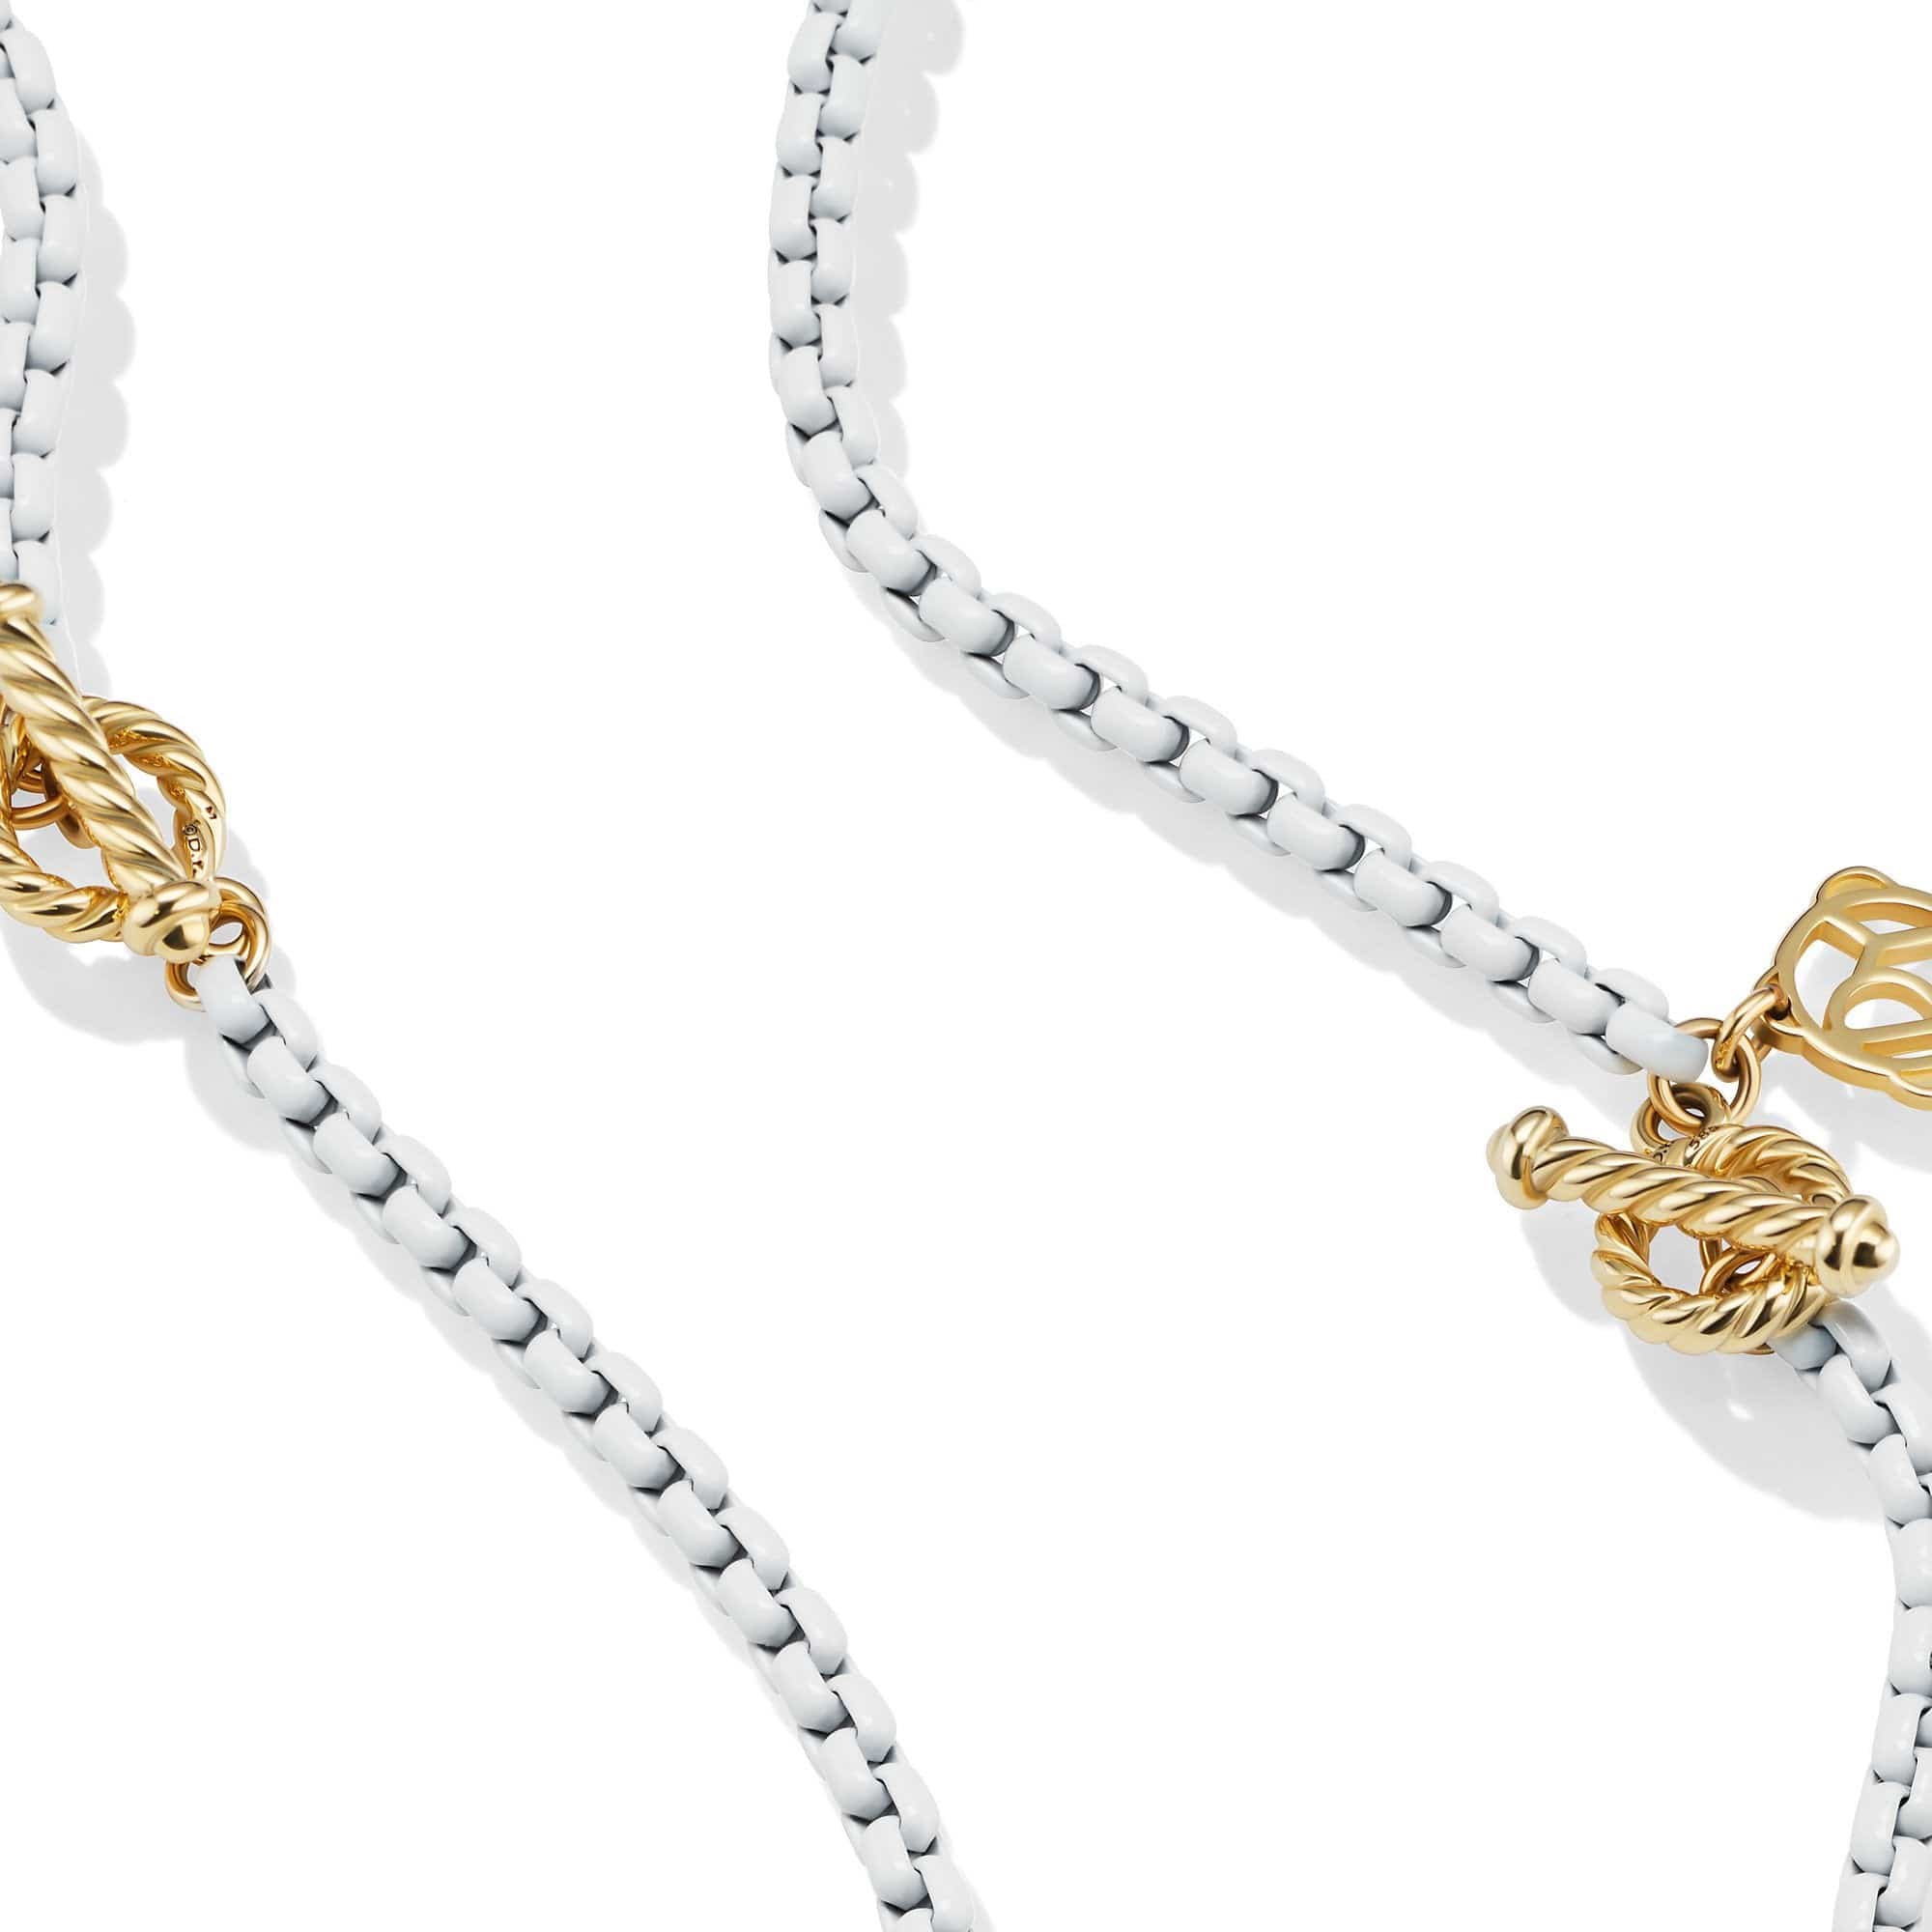 DY Bel Aire Chain Necklace in White with 14K Gold Accents